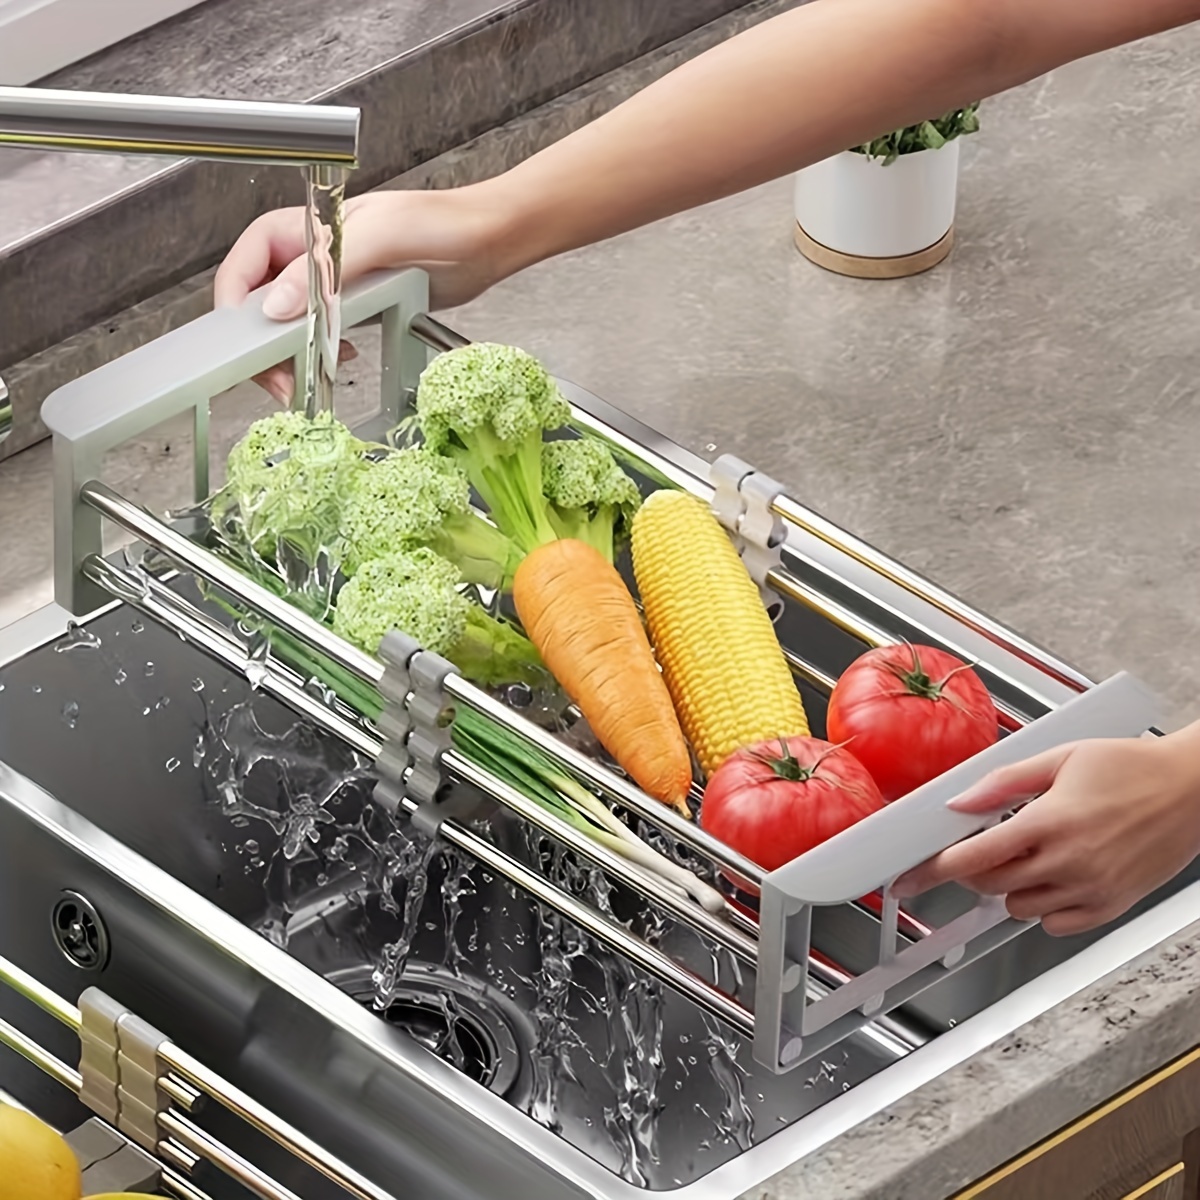 

1pc Adjustable Stainless Steel Over Sink Dish Drying Rack, Extendable Storage Drain Basket For Kitchen, Space-saving Drainer For Dishes, Vegetables, Cutlery